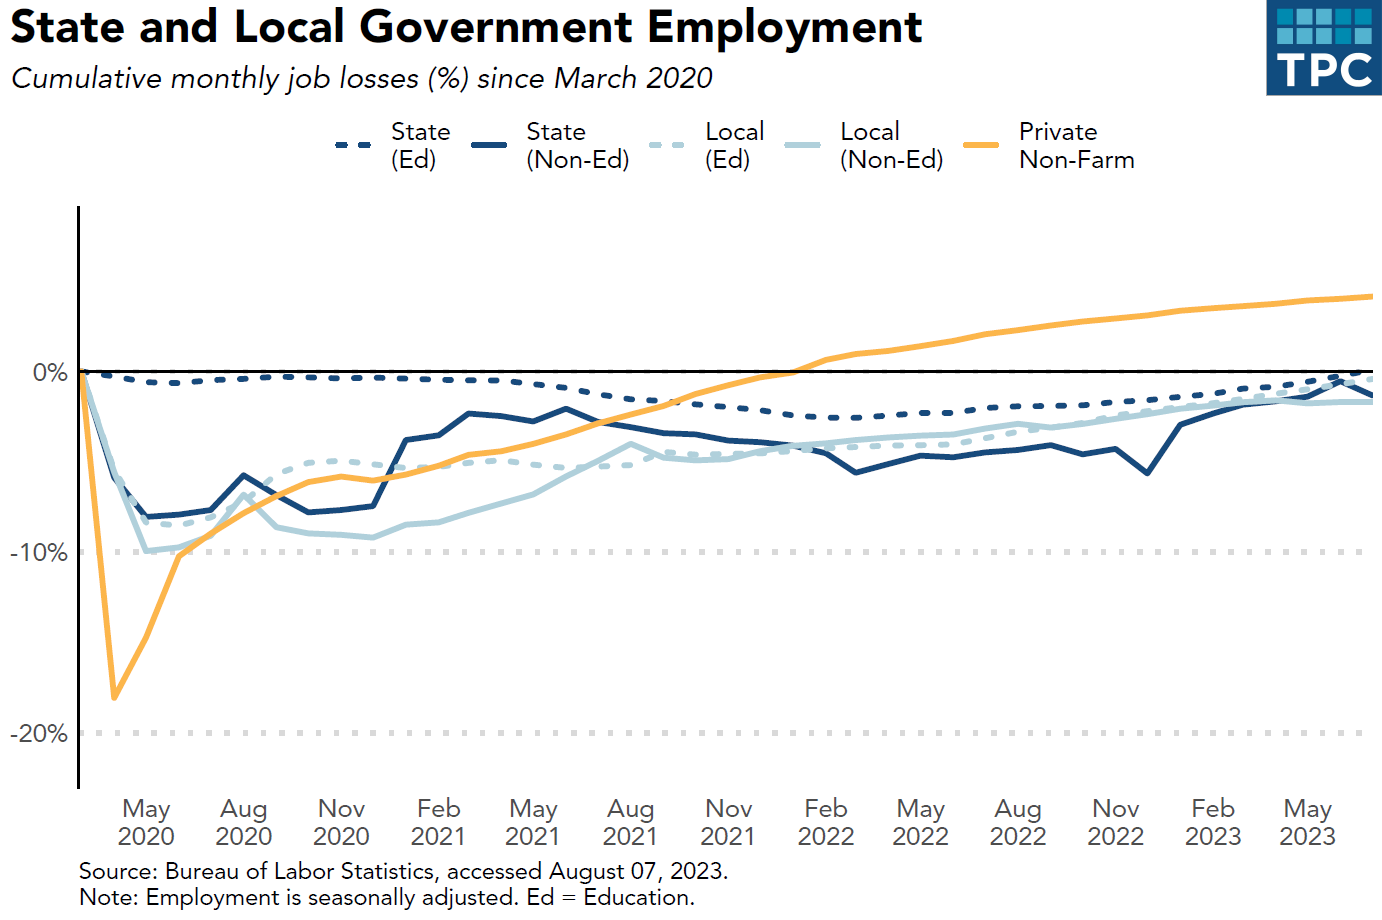 chart showing state and local government employment lagging behind the private sector recovery from March 2020 to May 2023